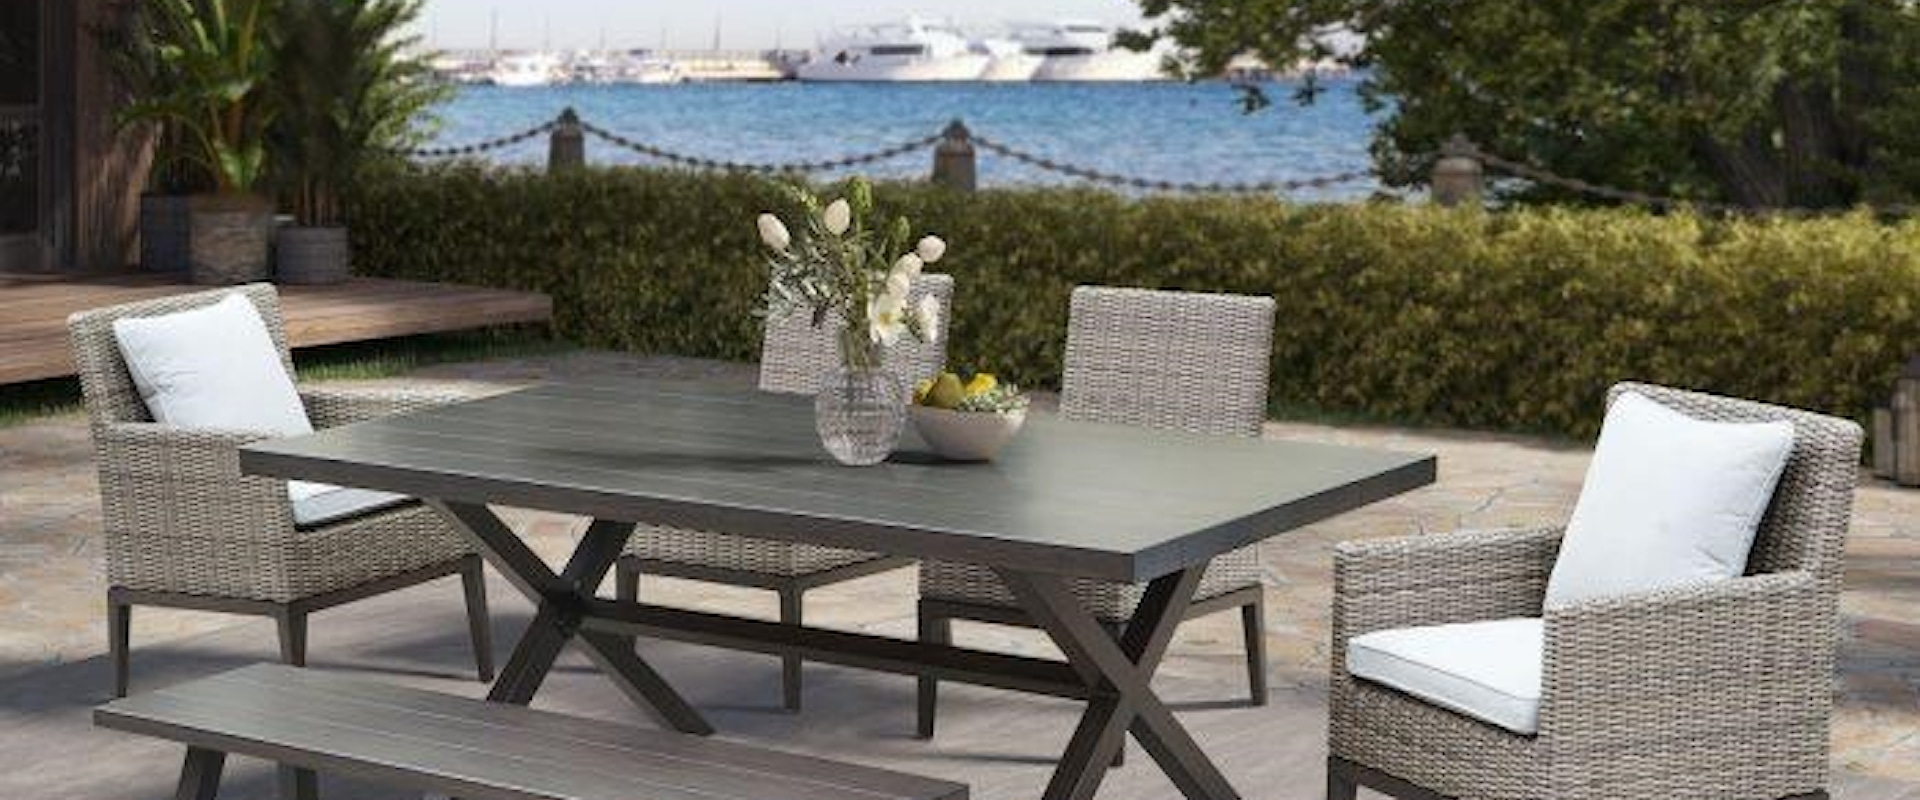 7 Pce Outdoor Dining Set - Not Including Bench